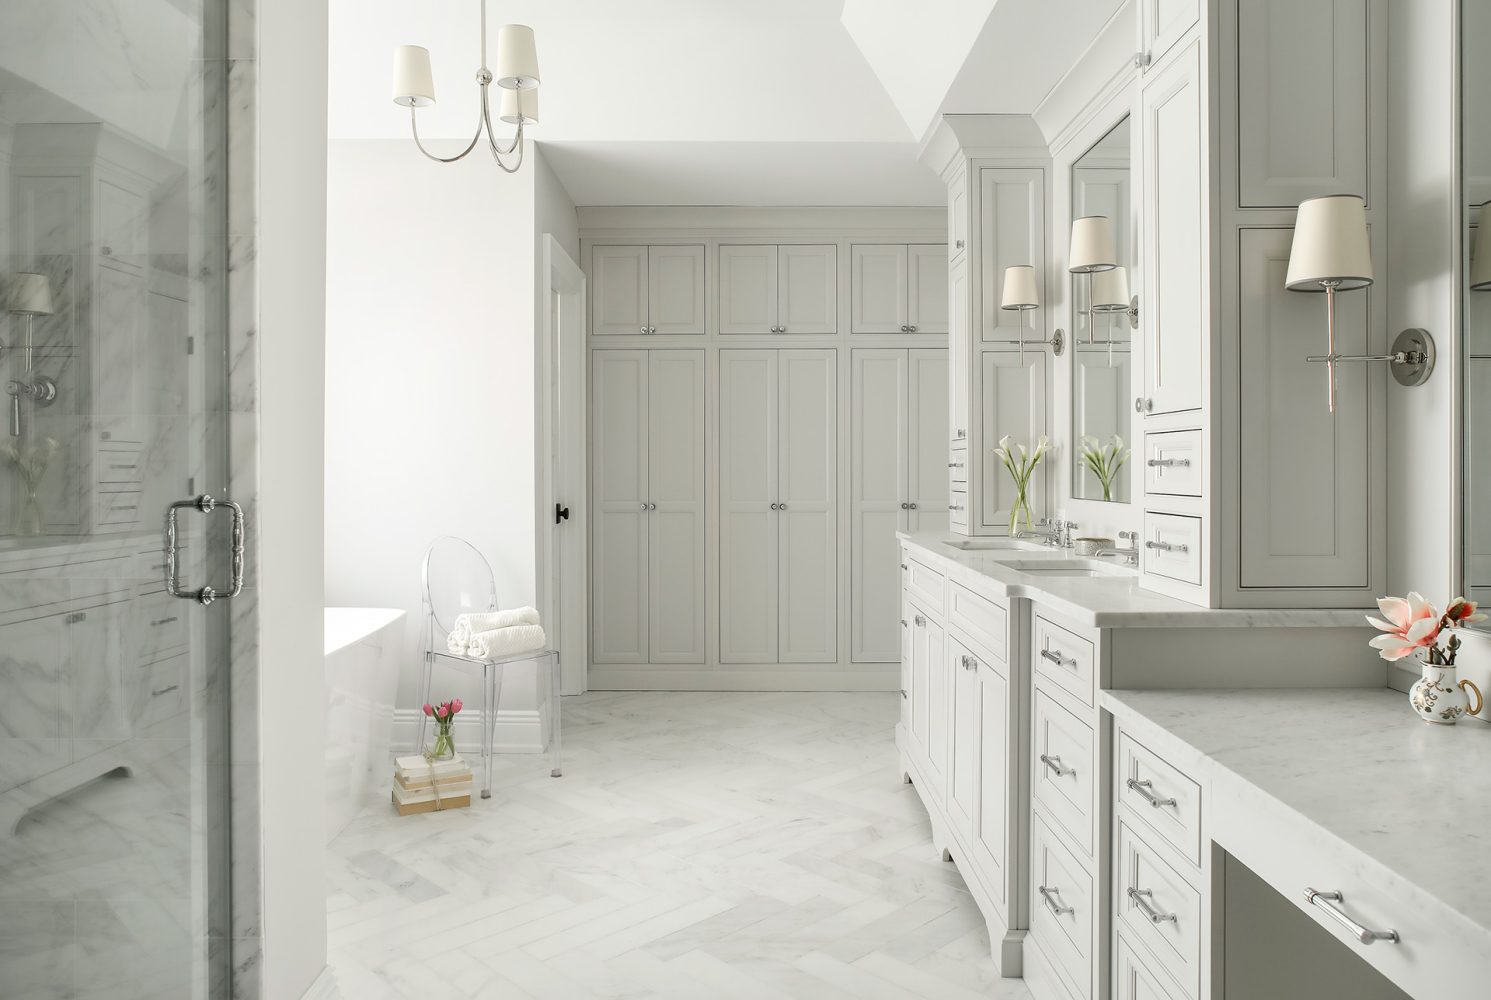 Extensive built-in cabinetry, vanity, and makeup table in white marble bathroom.